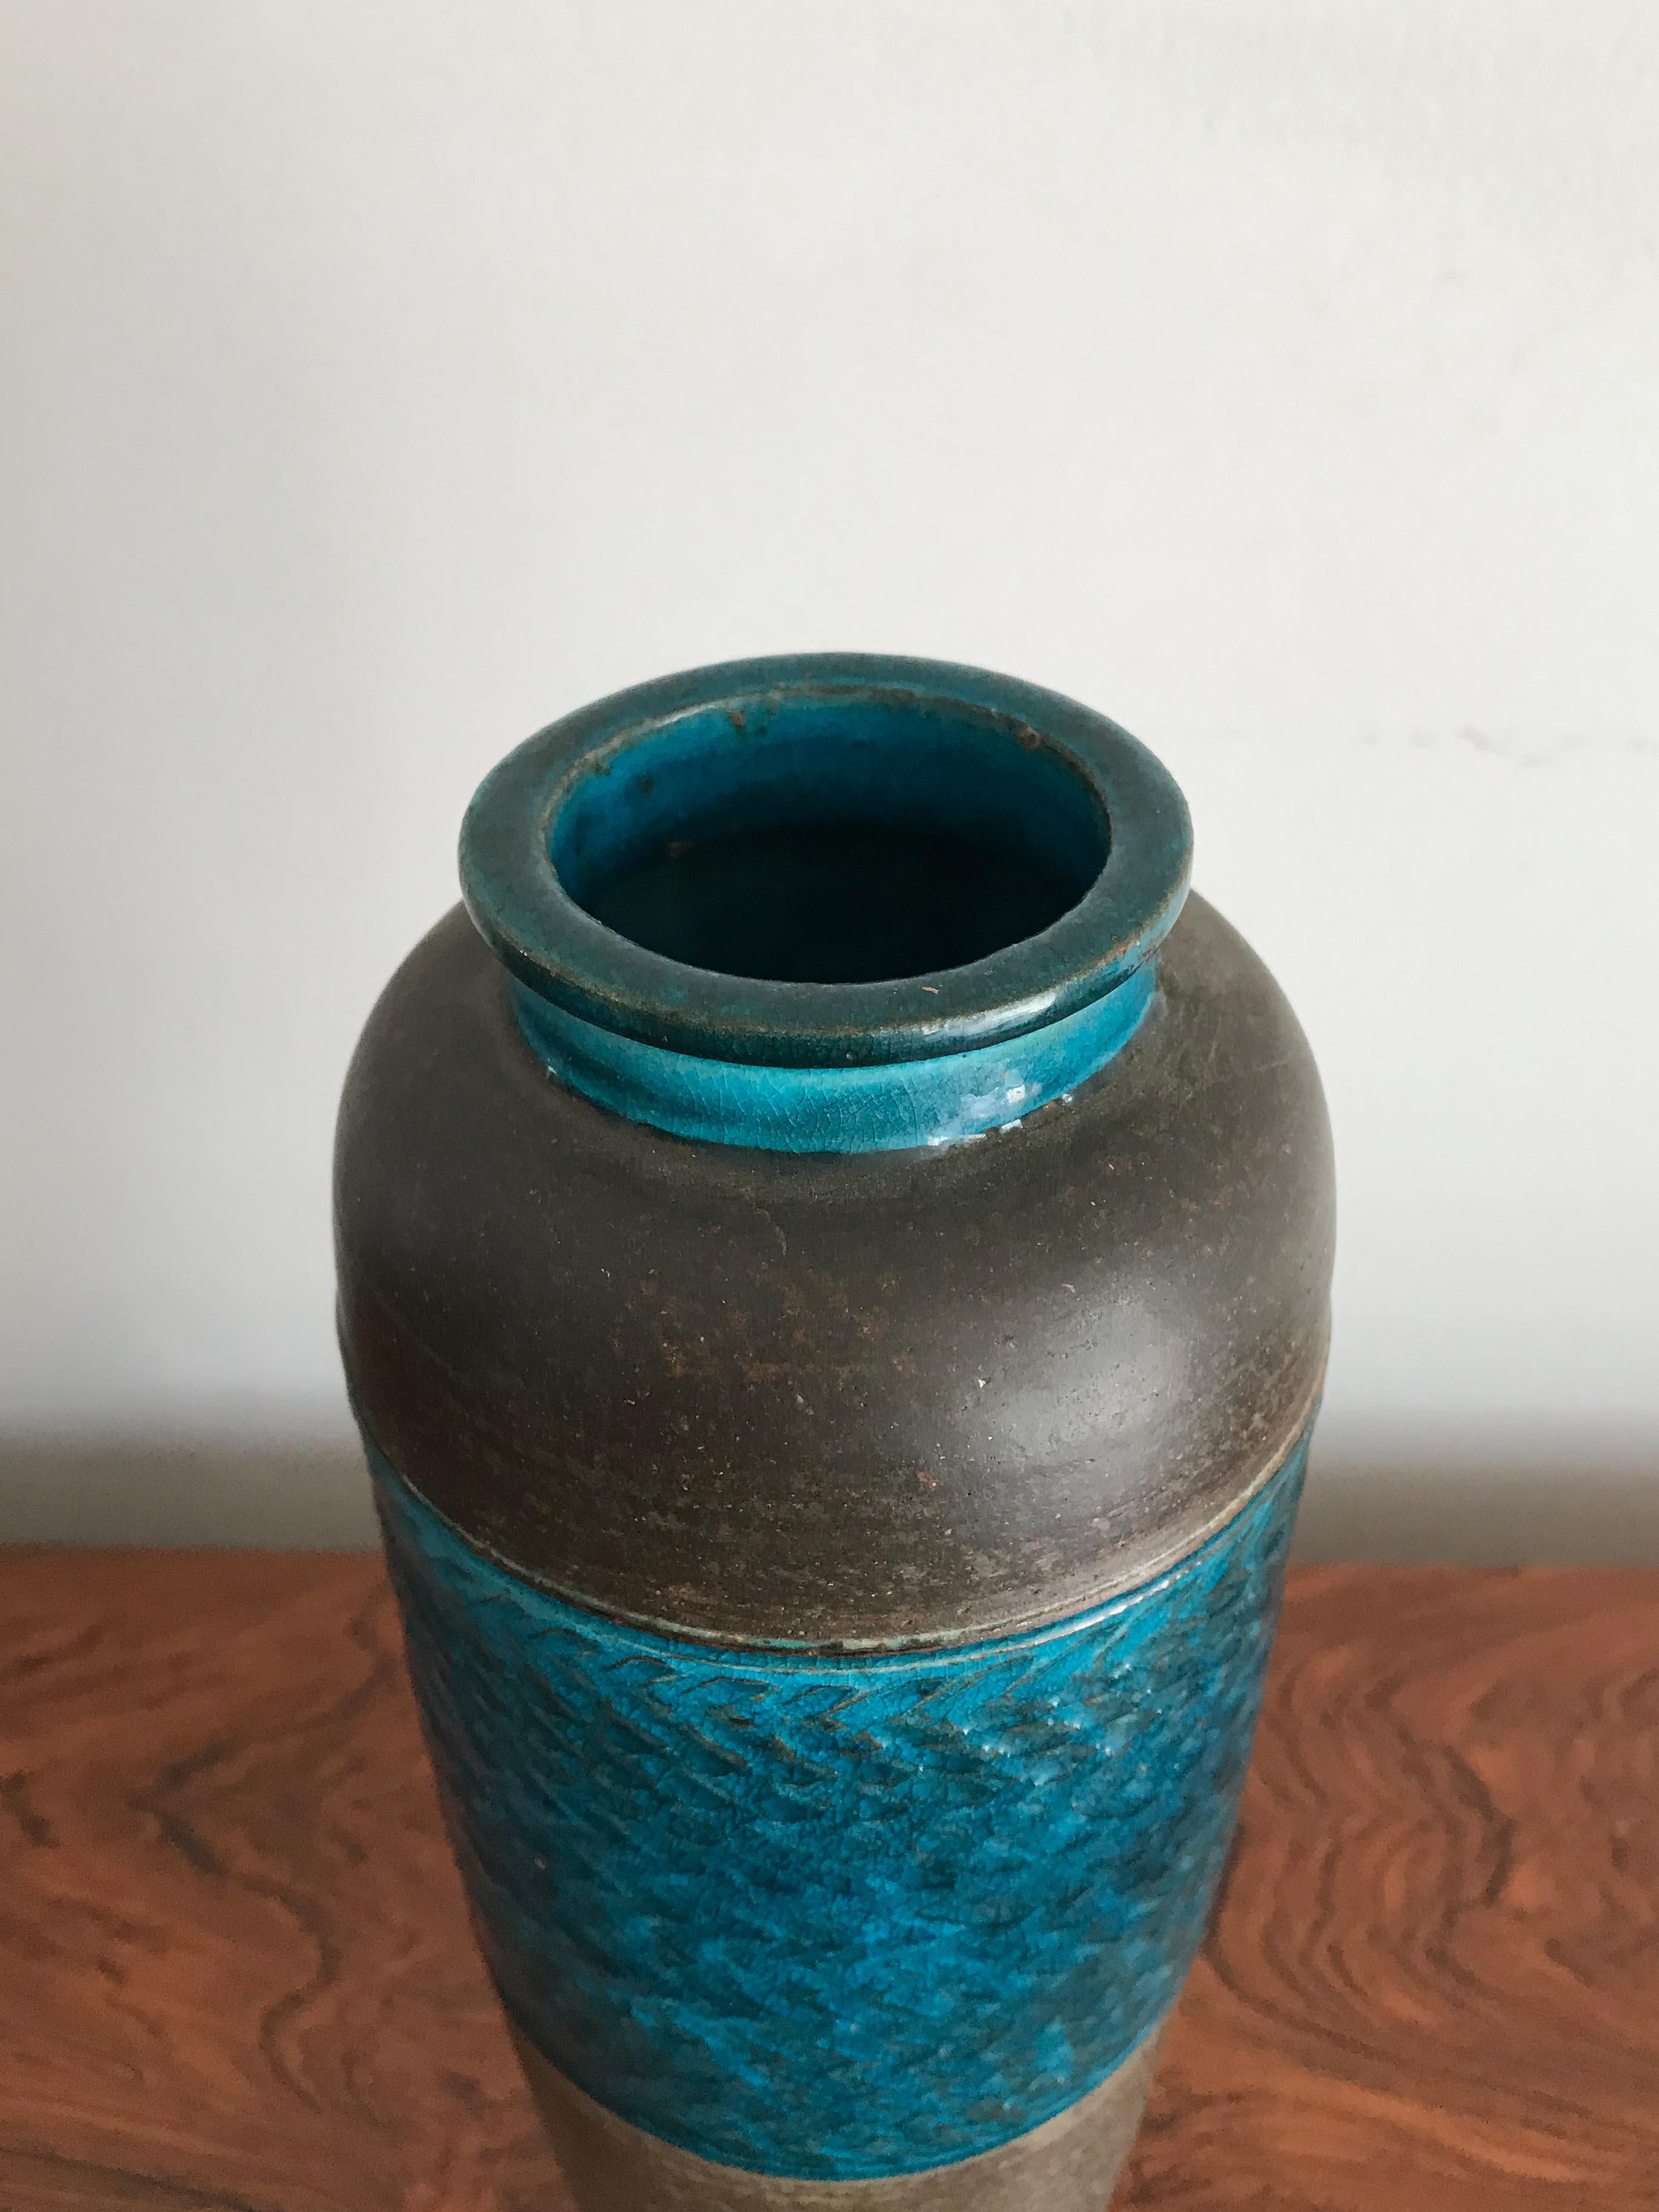 Scandinavian Mid-Century Modern design stoneware vase designed by Nils Kähler and manufactured by Kähler with manufacturer’s and designer’s mark engraved under the base, Denmark 1950s. 

Please note that the items is original of the period and